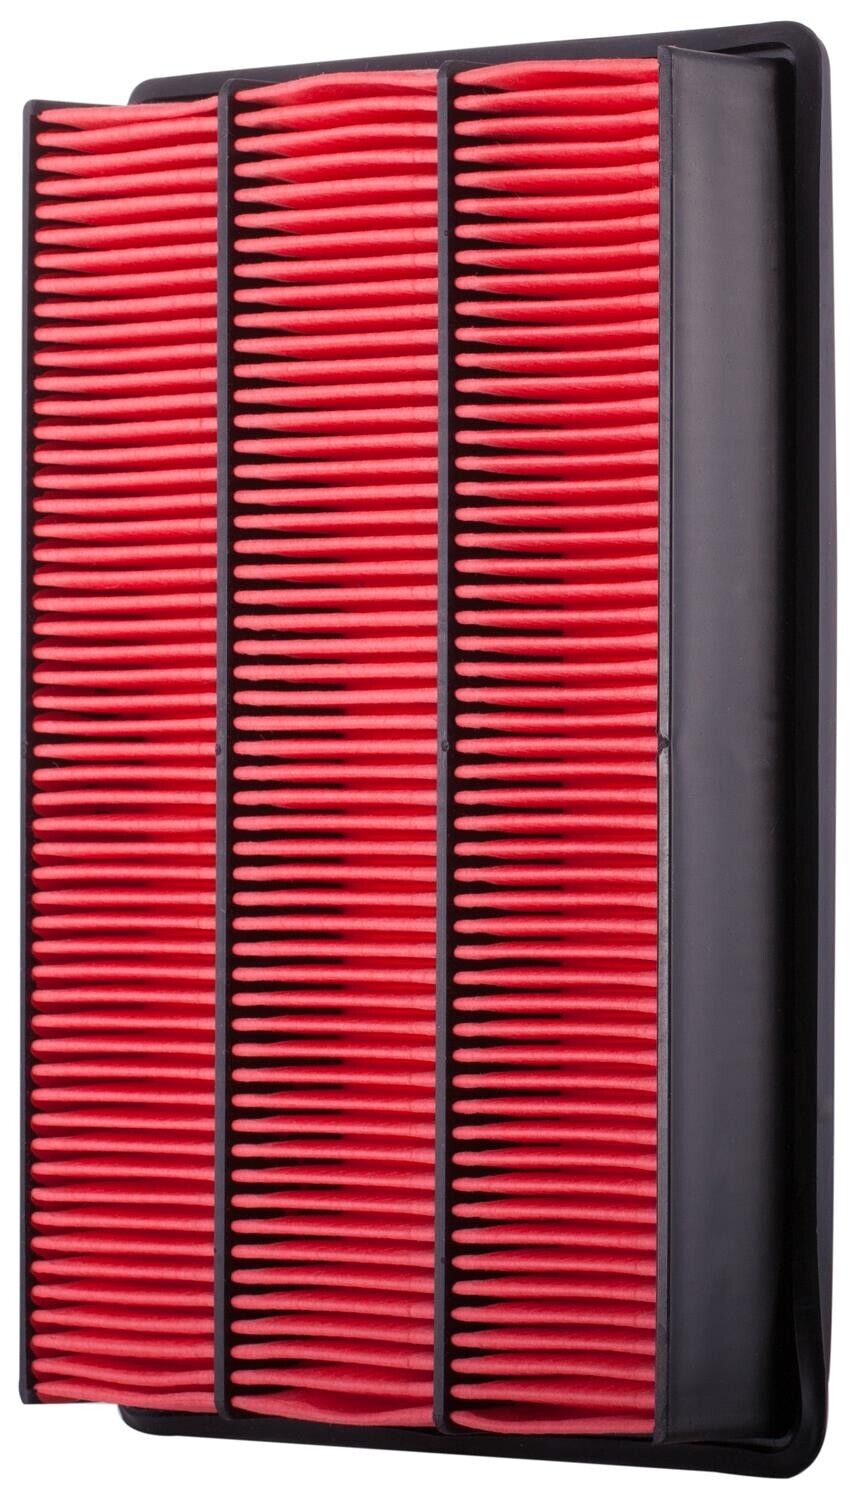 Pronto Air Filter for FX45, Q45, M45 PA4807